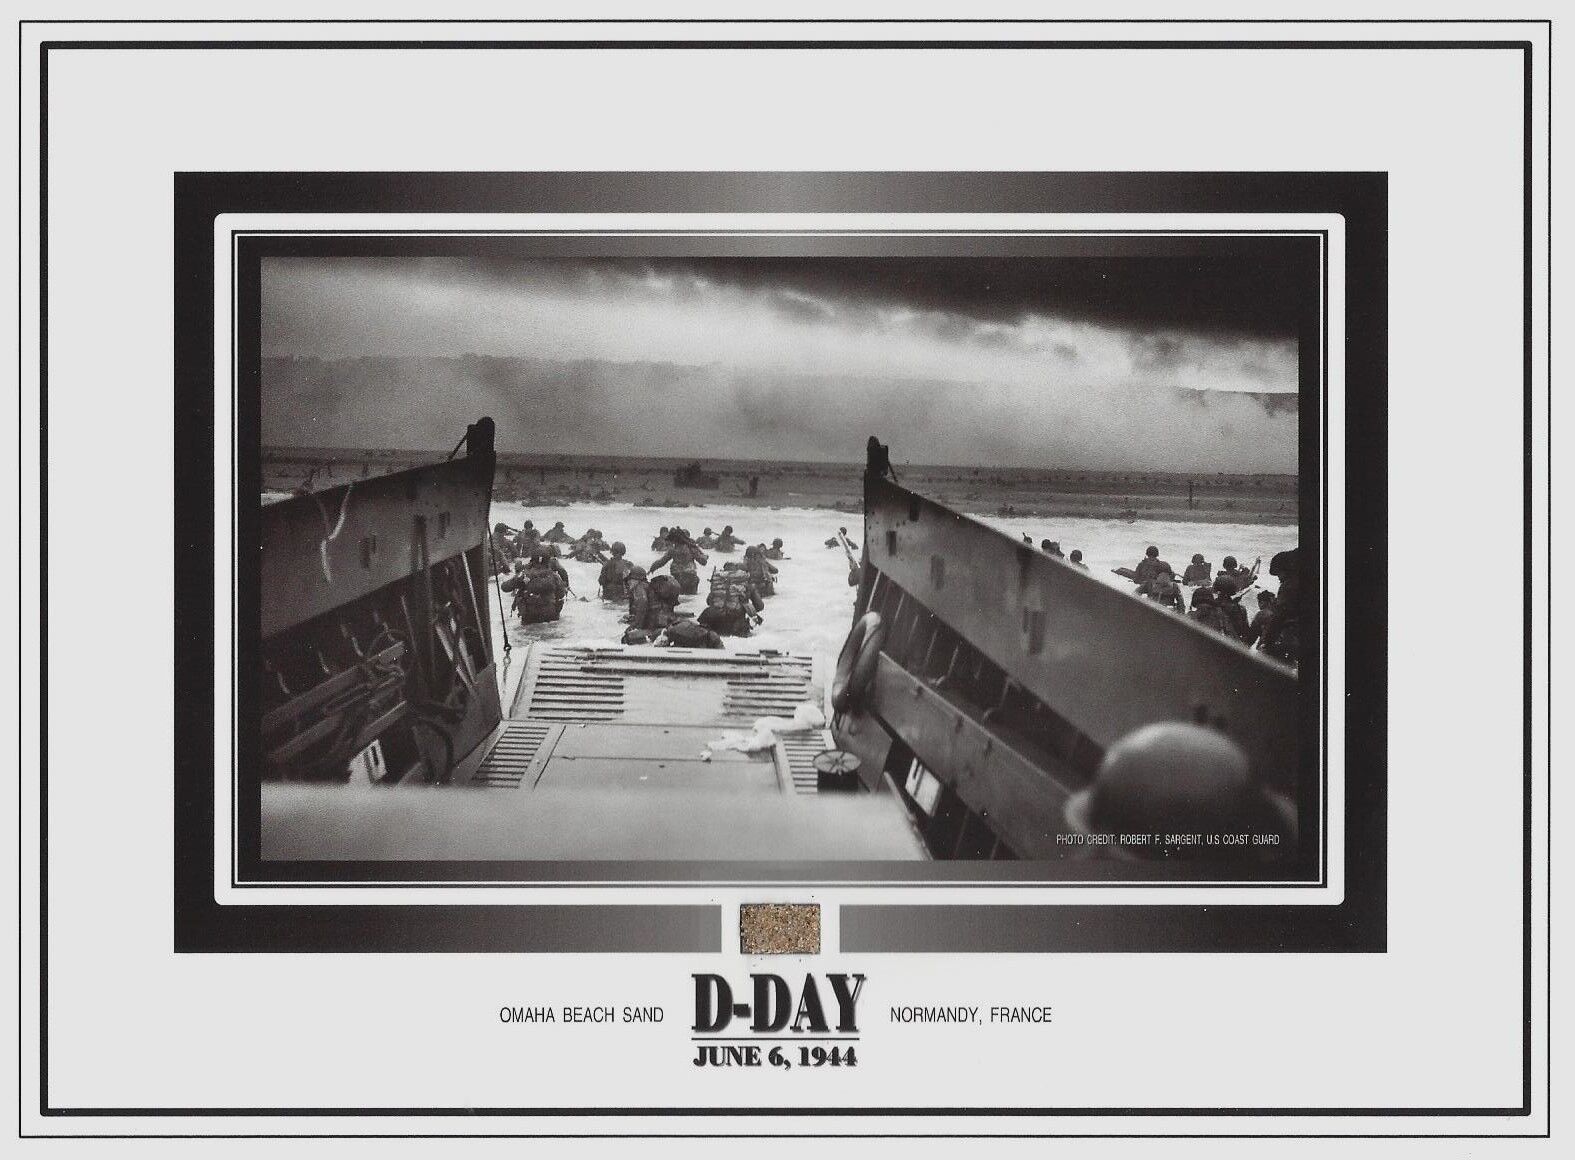 D-DAY, OMAHA BEACH at NORMANDY, France, SAND, World War II WWII Invasion, relic